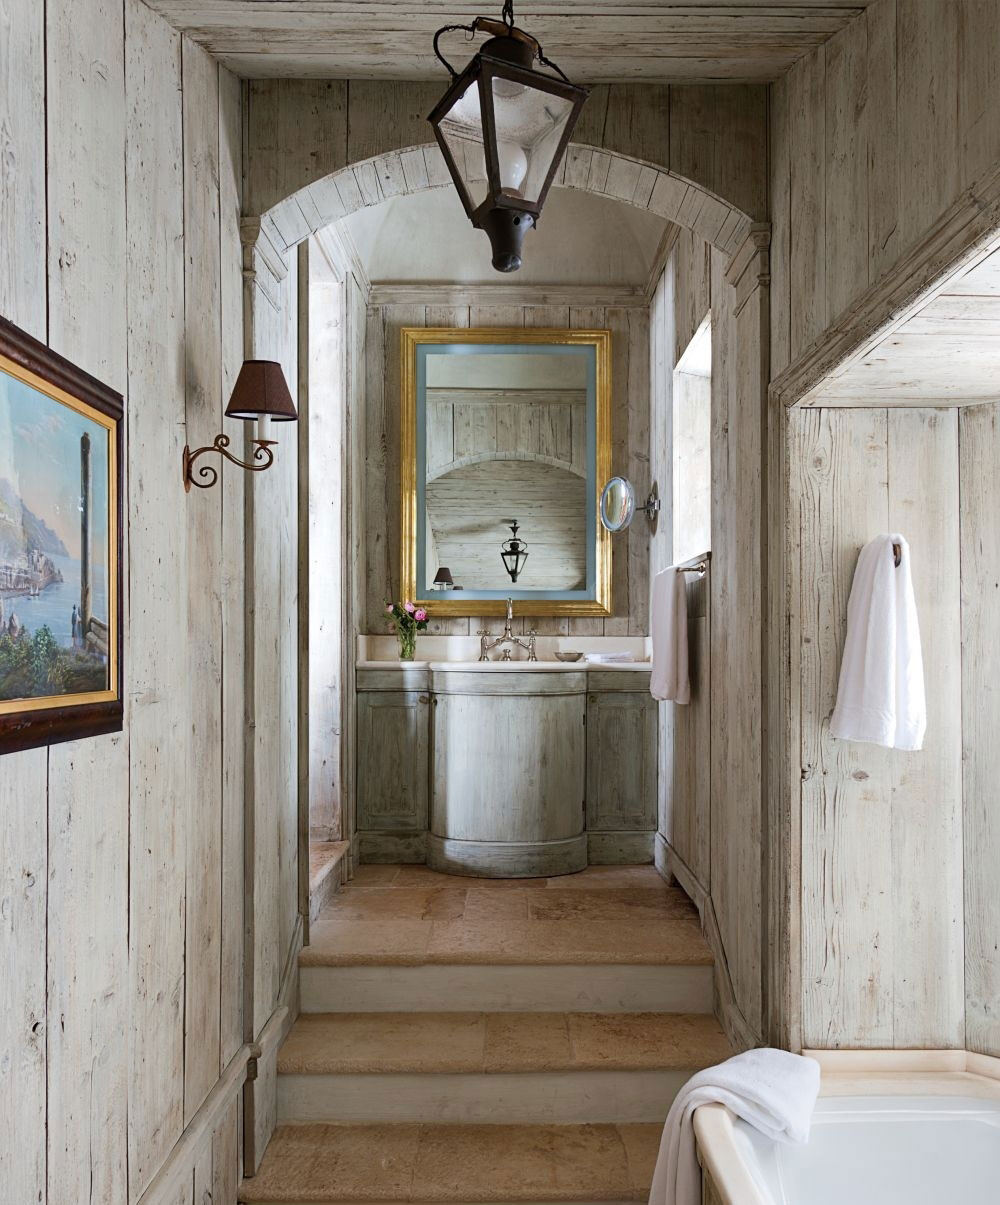 Chic Rustic With Shabby Chic Rustic Bathroom Ideas With White Covered Deck Wall And Antique Candle Sconce Shade Bathroom Traditional Wooden Made Furniture And Simple Fixtures Inside Rustic Bathroom Design